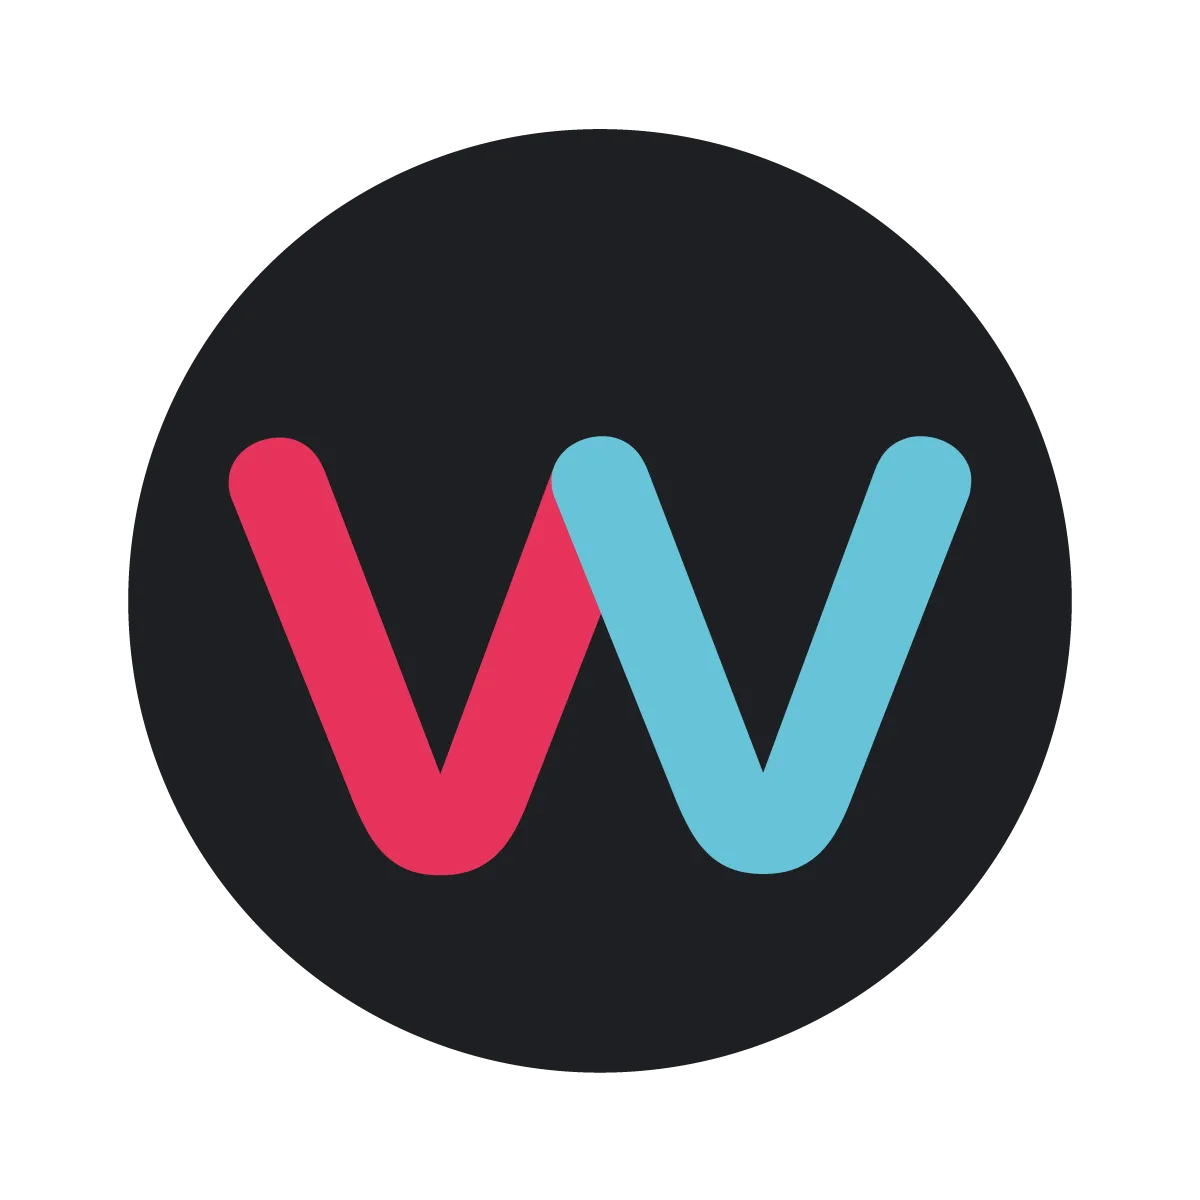 logo-wizaplace.png.webp